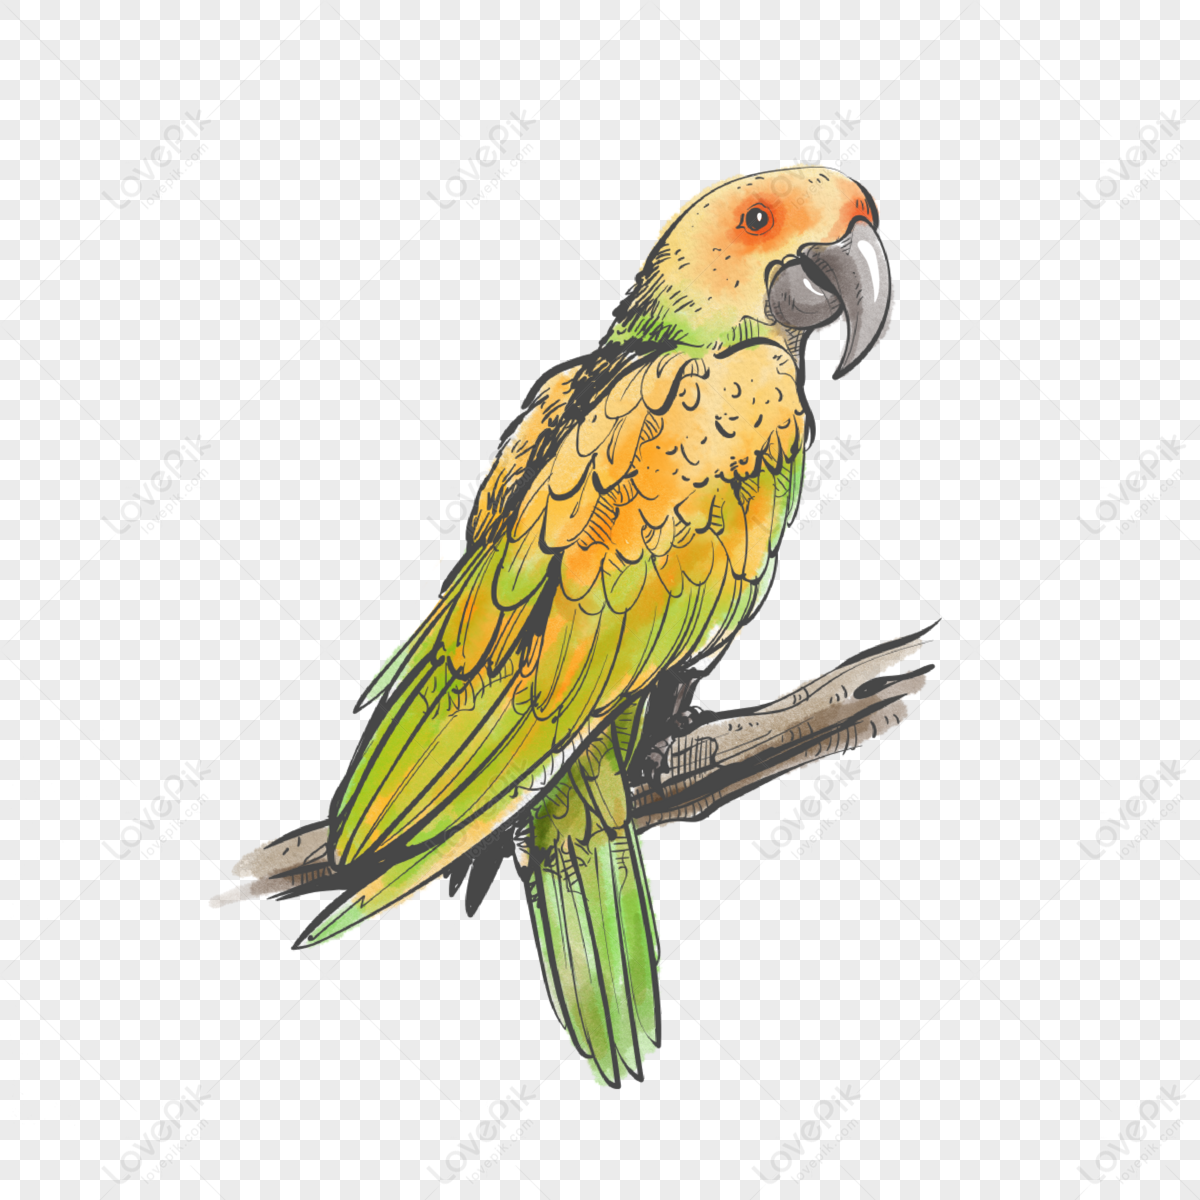 Green yellow parrot watercolor hand drawn cartoon animal elements,little birds,hand painted png transparent image